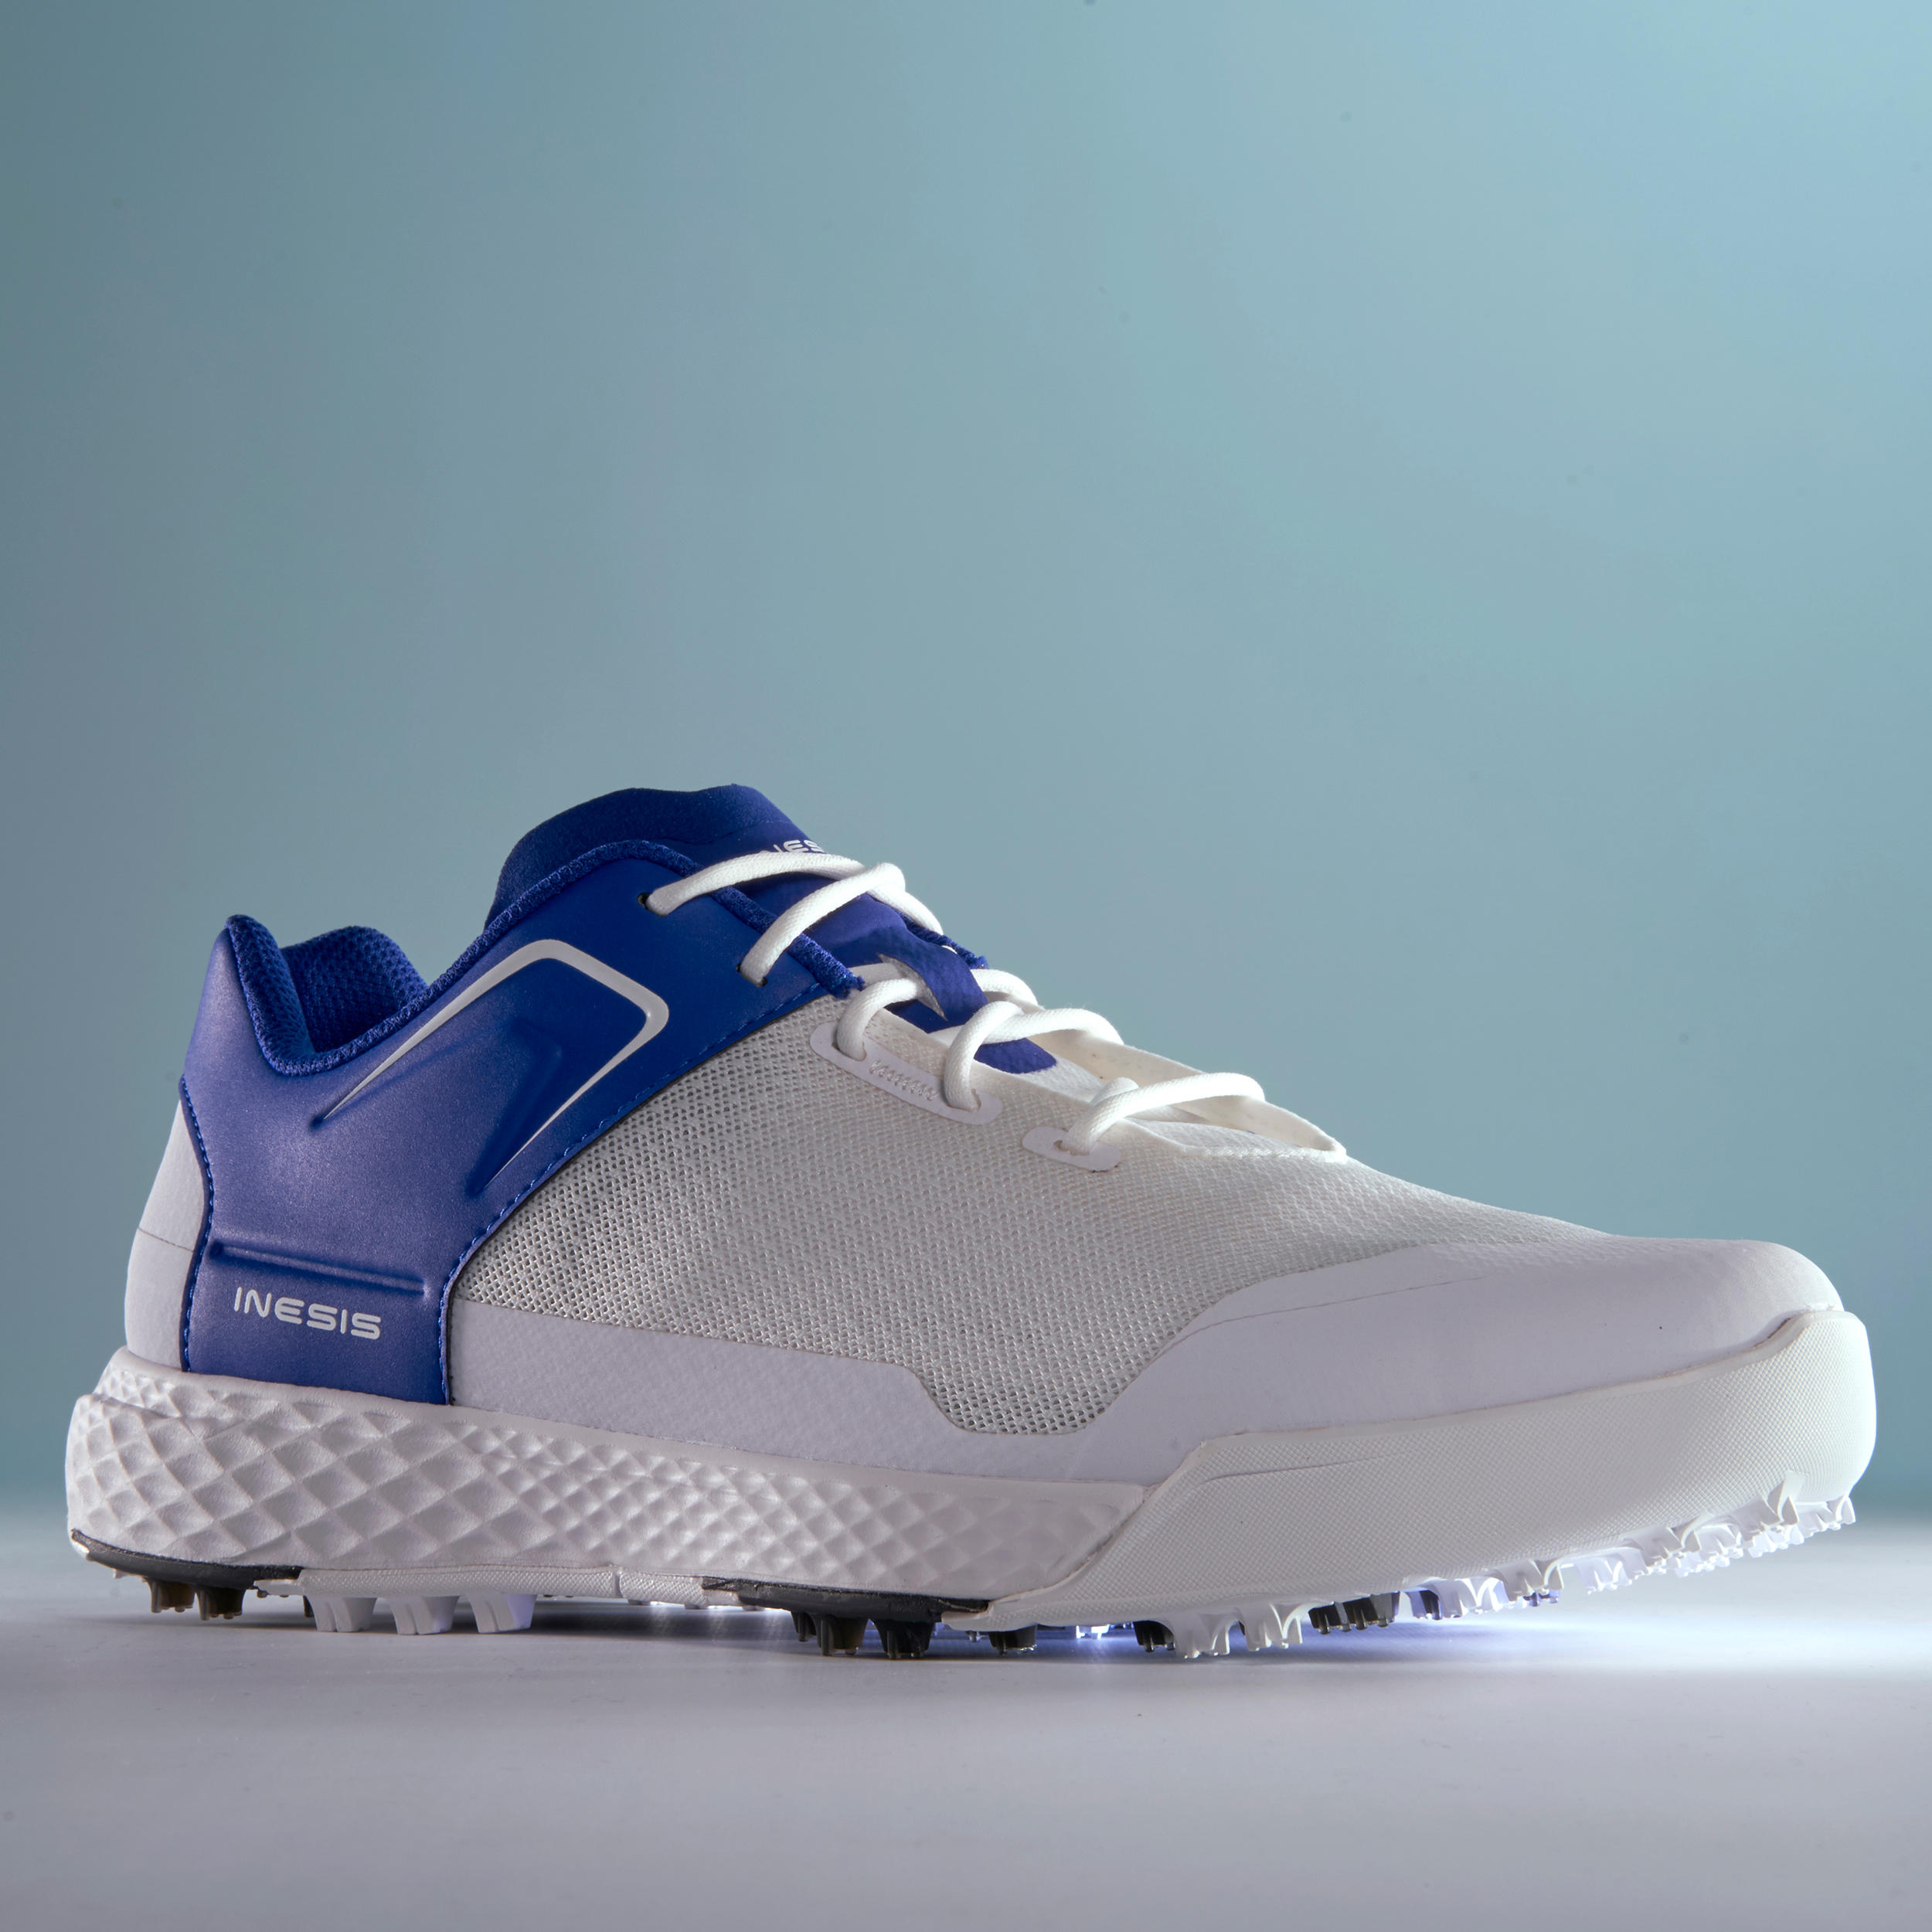 MEN’S GRIP SUMMER GOLF SHOES WHITE AND BLUE 3/13